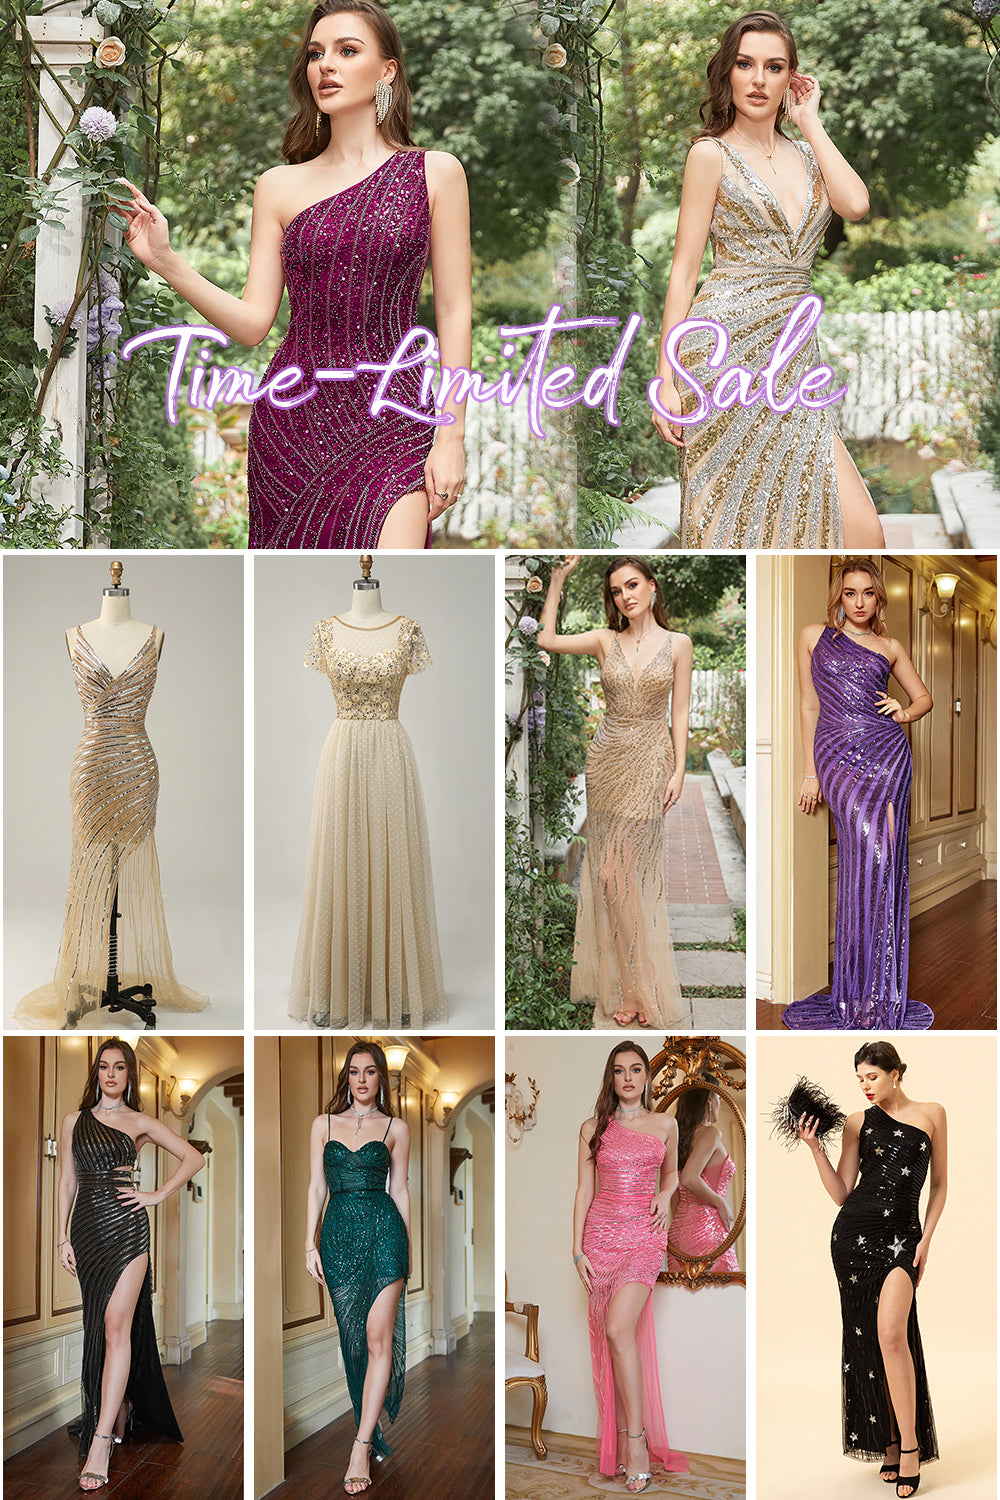 Time-Limited Sale For Beaded Prom Dress (1 pc - Random Style & Color)